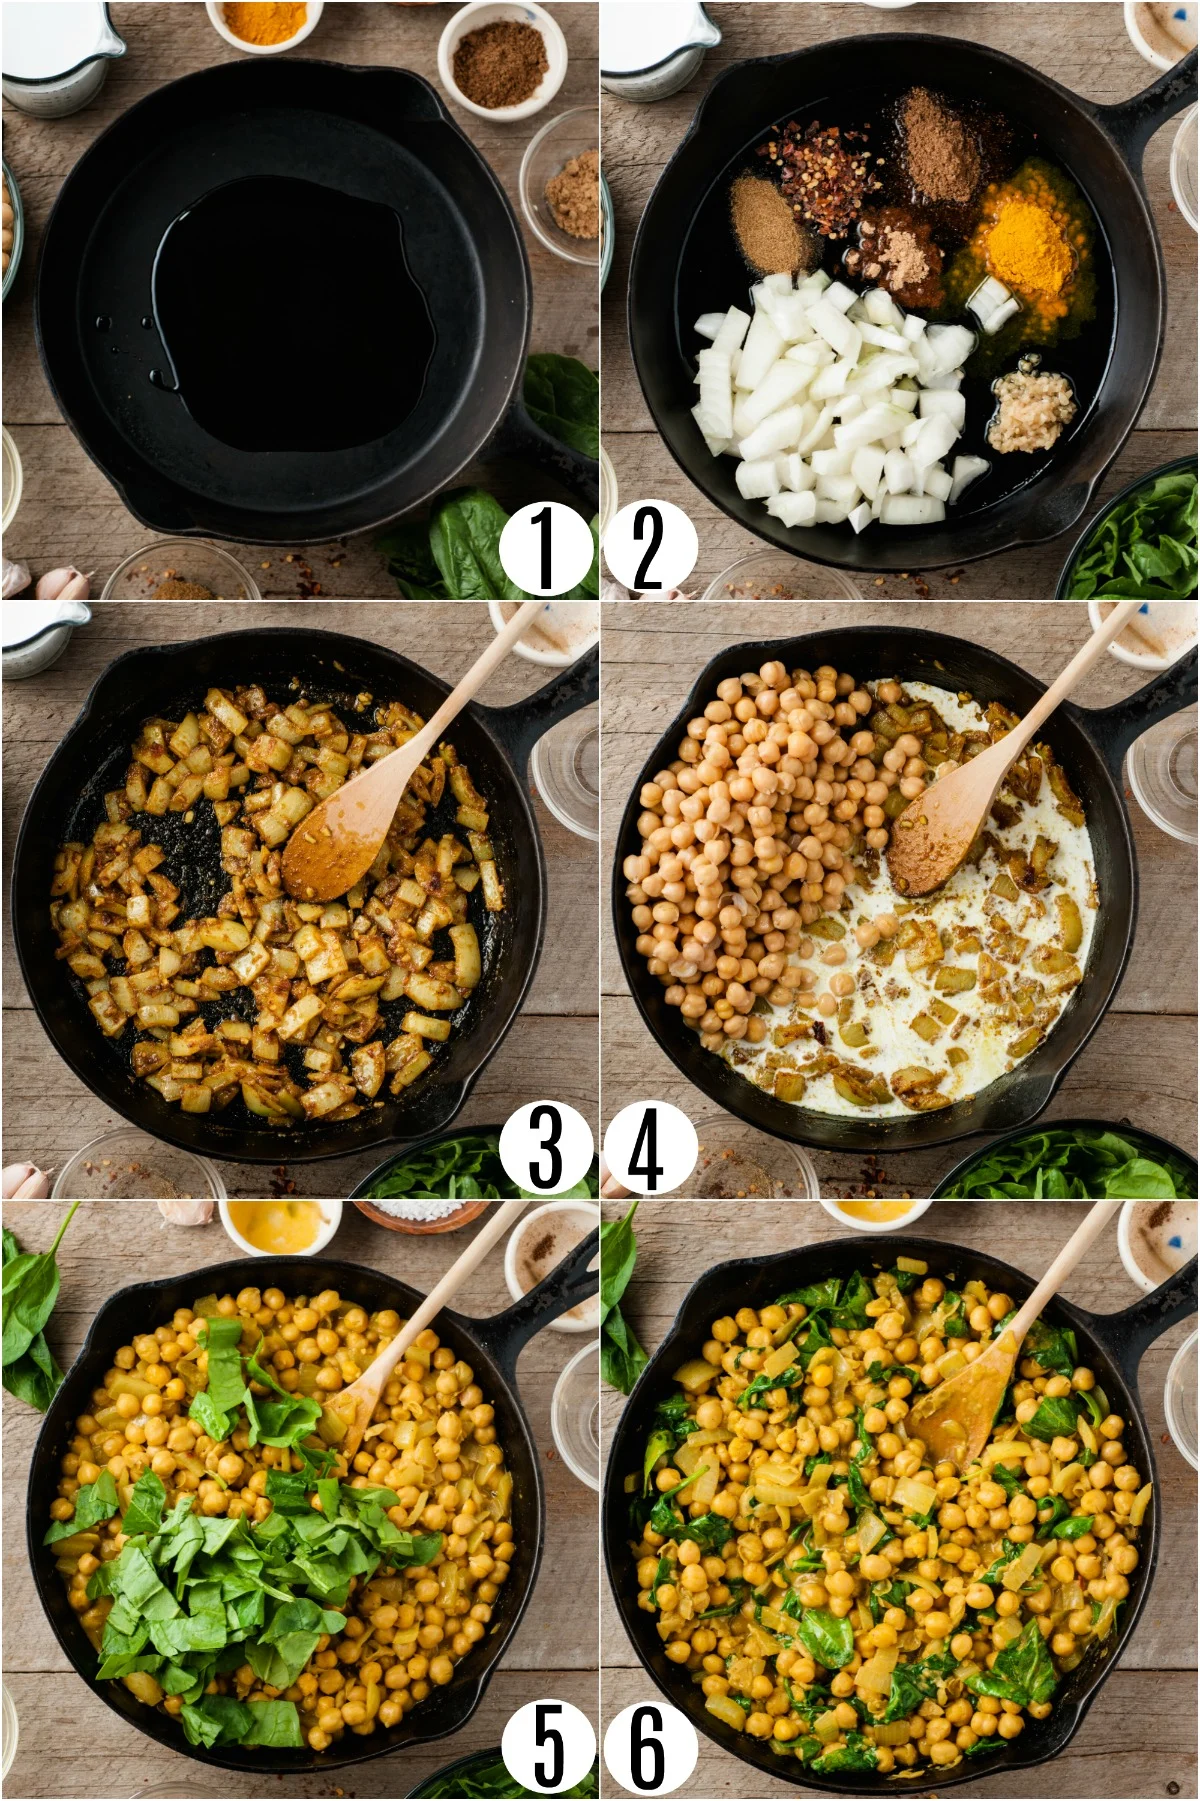 Step by step photos showing how to make chickpea curry.